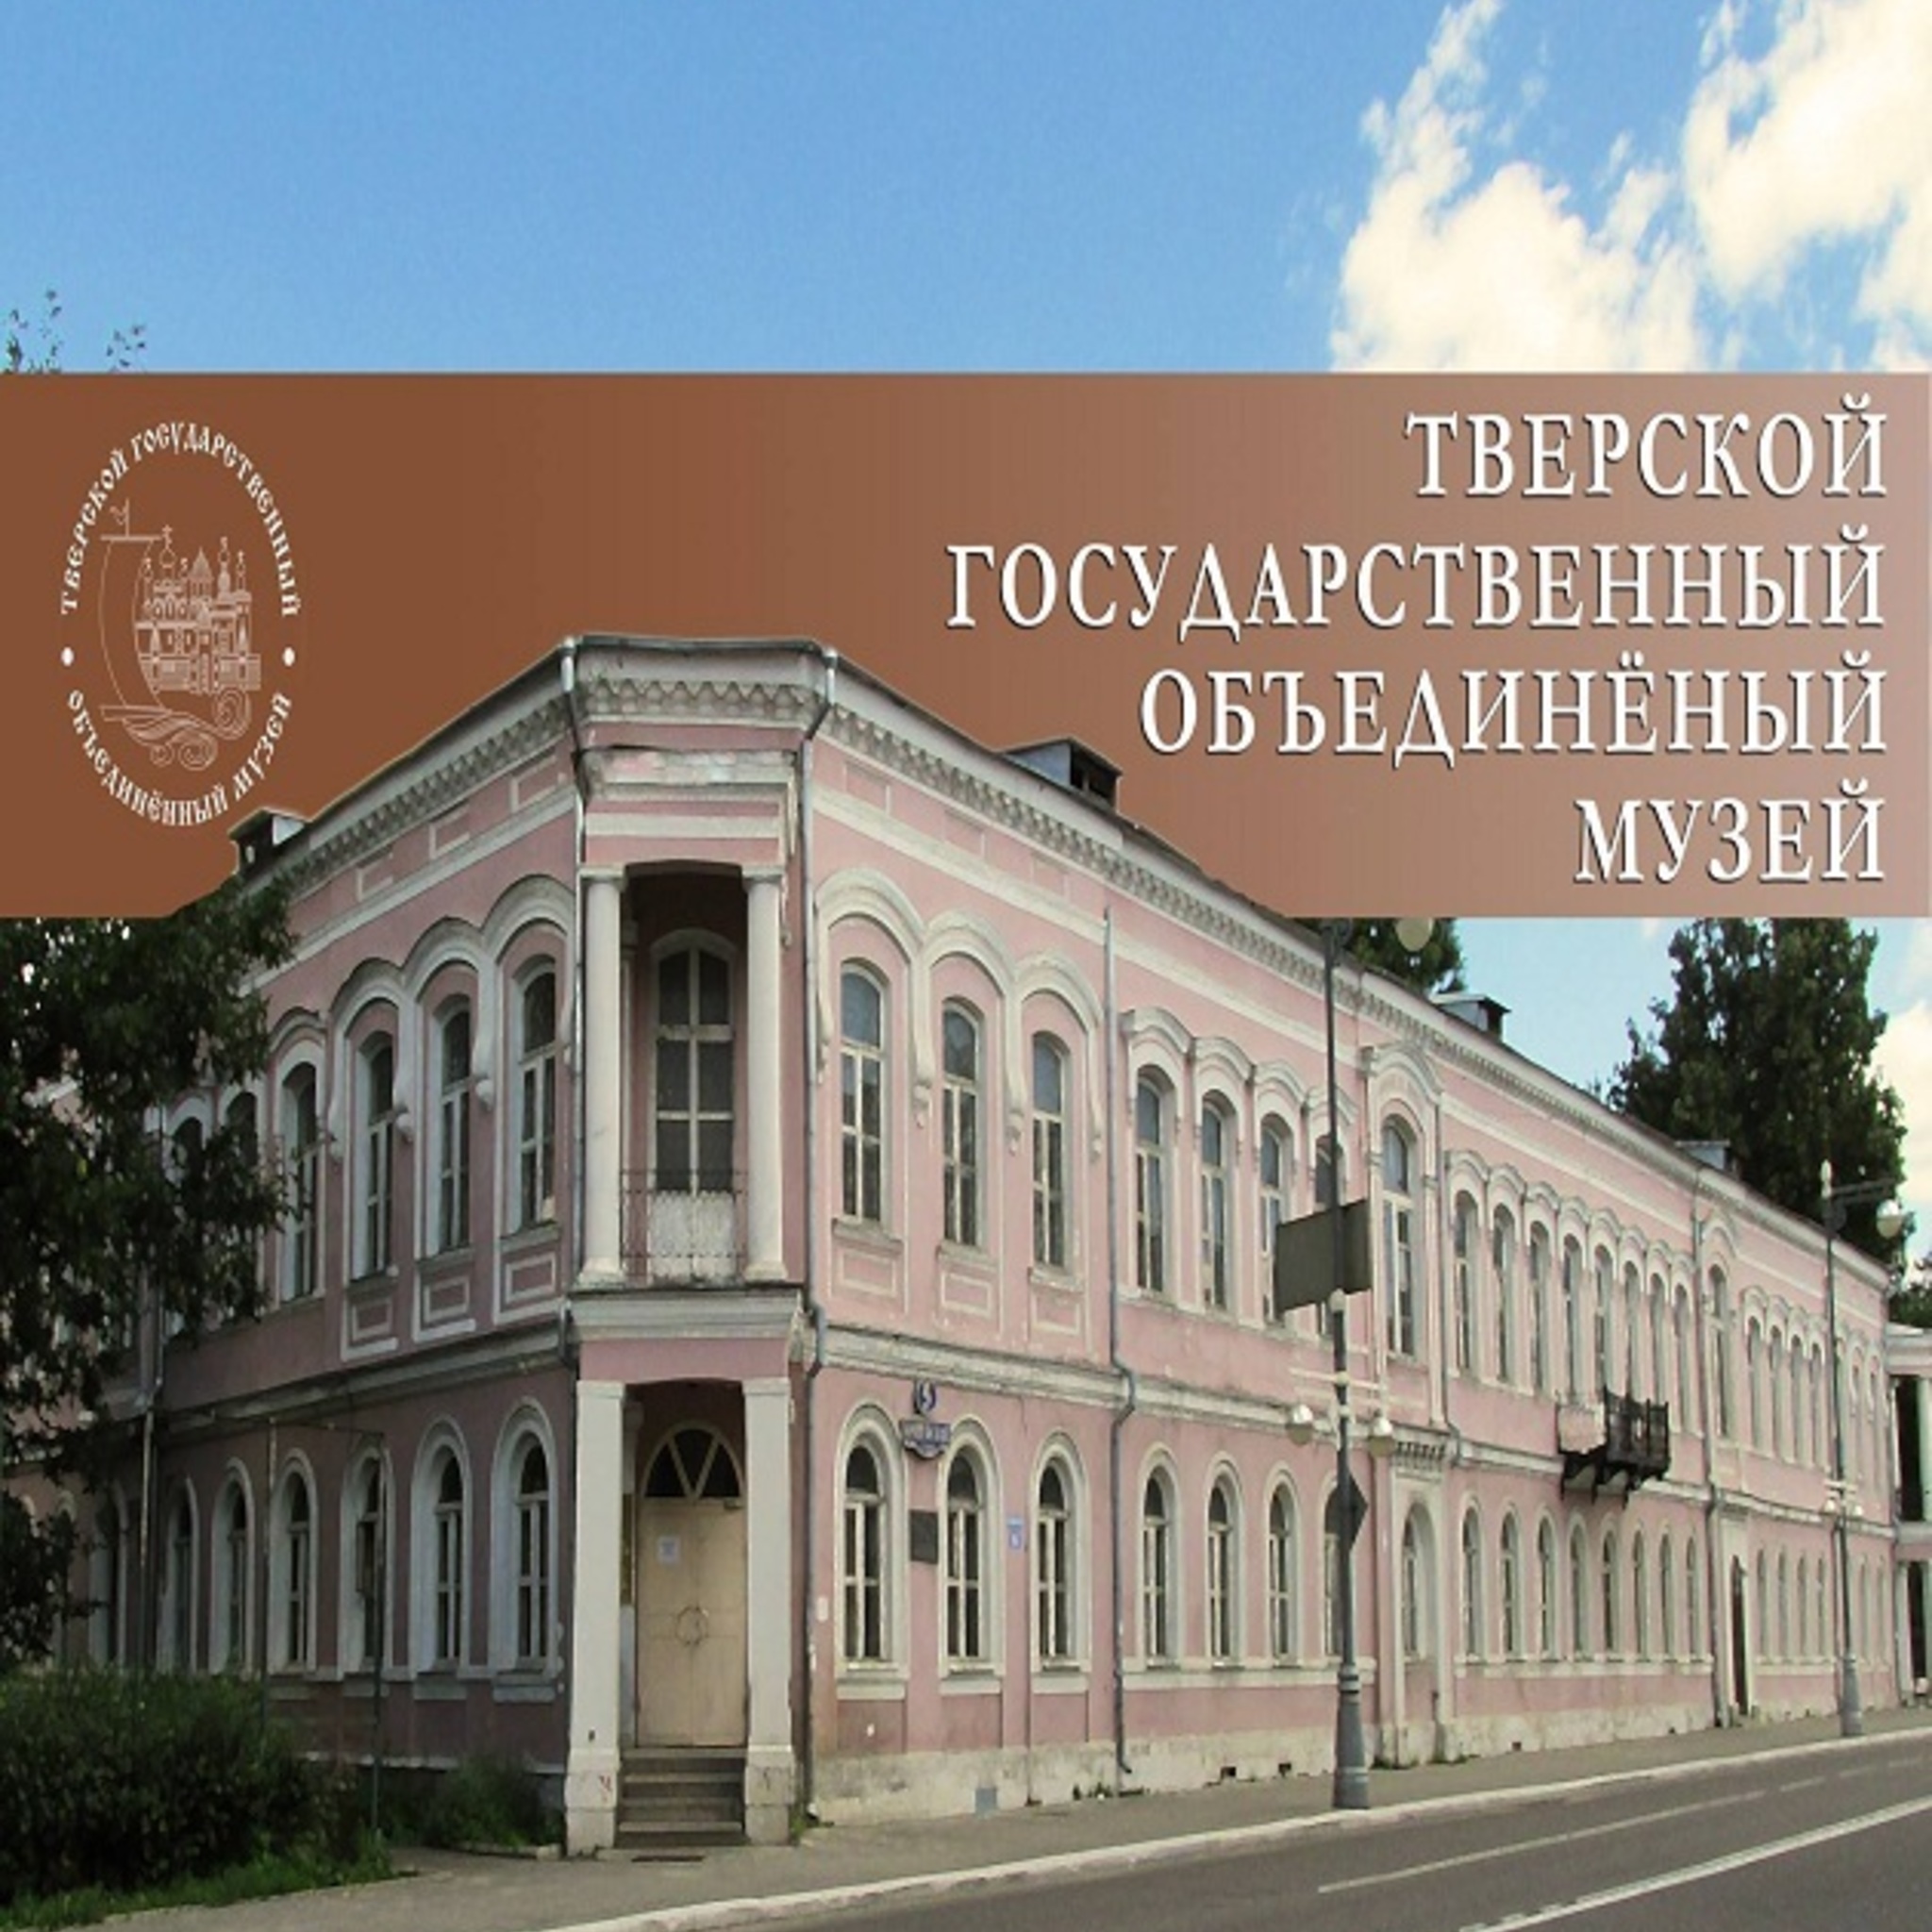 Our events Tver State United Museum on July 2015